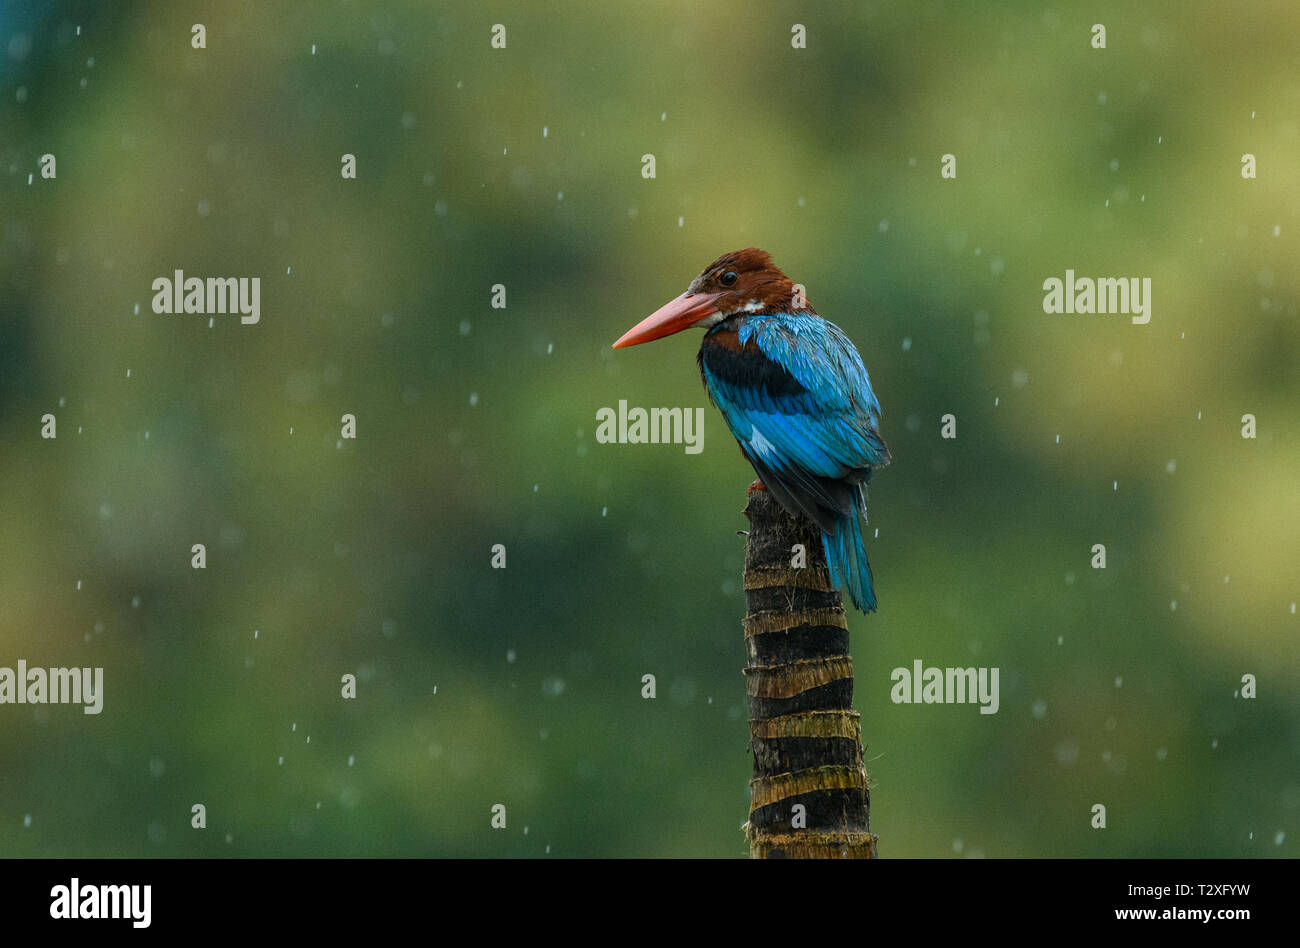 Kingfisher perching on branch Stock Photo